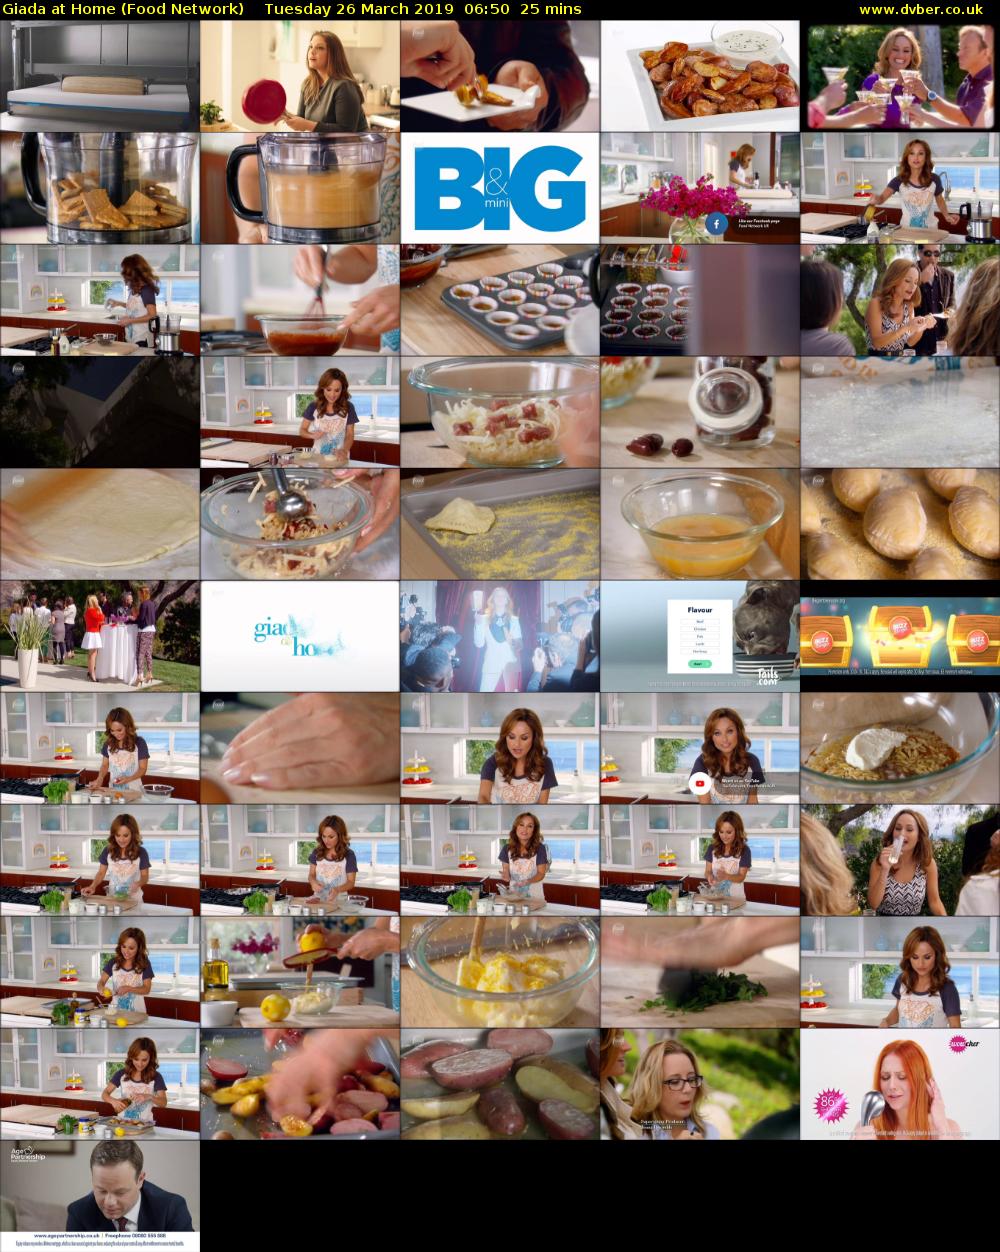 Giada at Home (Food Network) Tuesday 26 March 2019 06:50 - 07:15